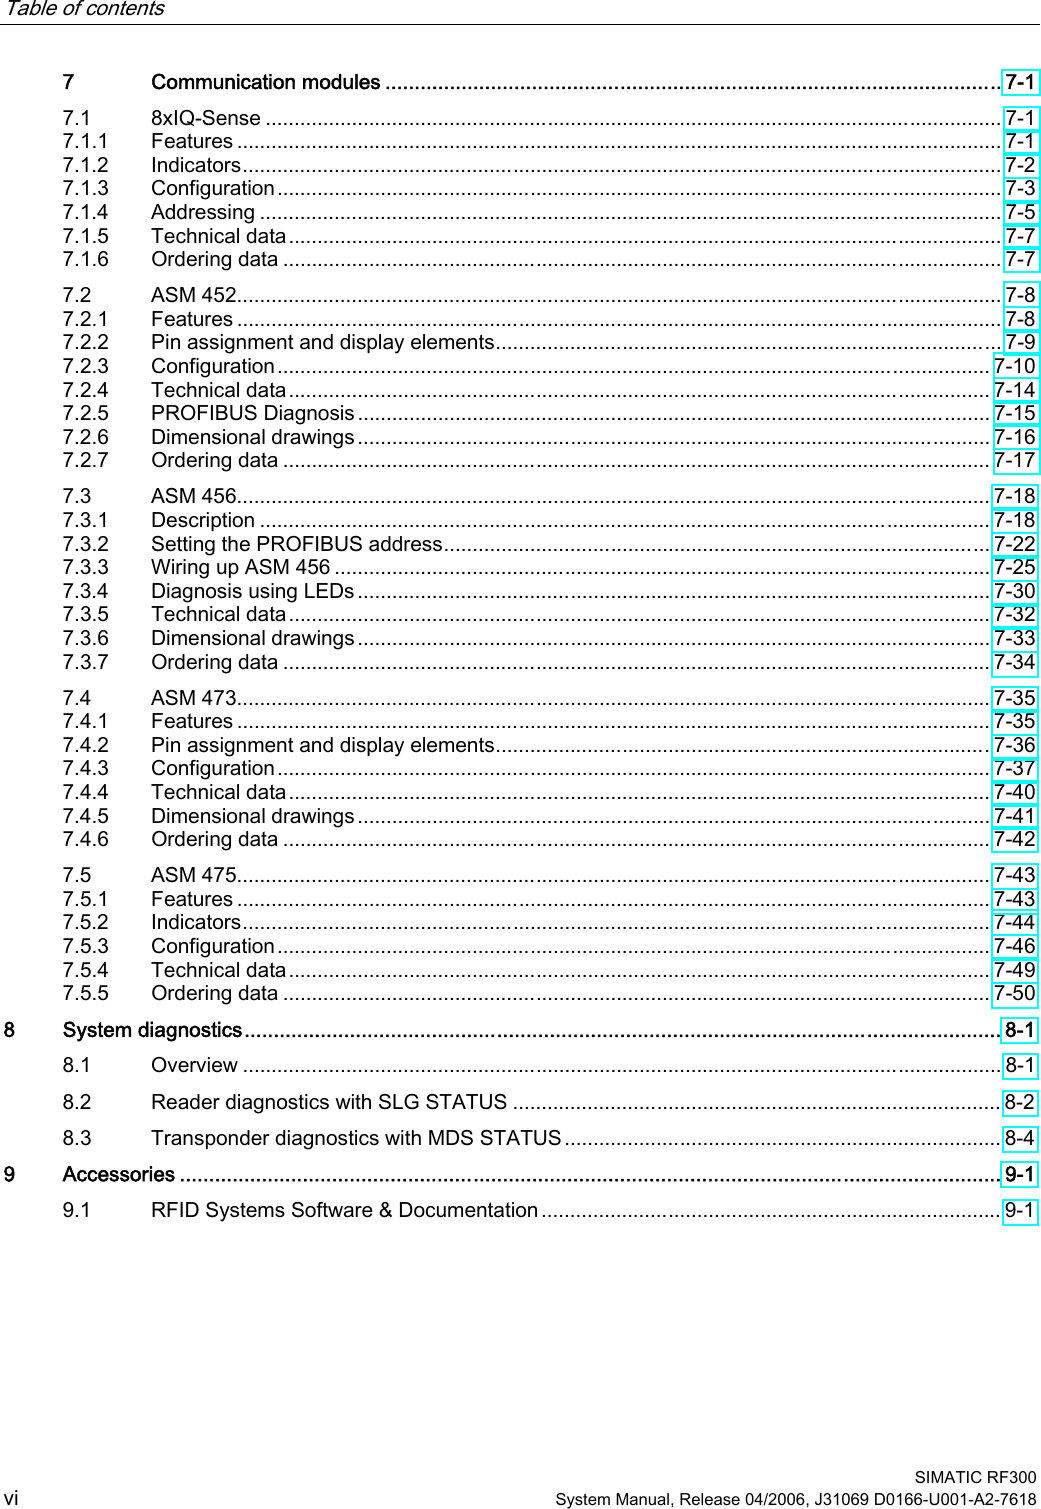 Table of contents    SIMATIC RF300 vi System Manual, Release 04/2006, J31069 D0166-U001-A2-7618 7  Communication modules ......................................................................................................... 7-1 7.1  8xIQ-Sense ................................................................................................................................ 7-1 7.1.1  Features ..................................................................................................................................... 7-1 7.1.2  Indicators.................................................................................................................................... 7-2 7.1.3  Configuration.............................................................................................................................. 7-3 7.1.4  Addressing ................................................................................................................................. 7-5 7.1.5  Technical data............................................................................................................................ 7-7 7.1.6  Ordering data ............................................................................................................................. 7-7 7.2  ASM 452..................................................................................................................................... 7-8 7.2.1  Features ..................................................................................................................................... 7-8 7.2.2  Pin assignment and display elements........................................................................................ 7-9 7.2.3  Configuration............................................................................................................................ 7-10 7.2.4  Technical data.......................................................................................................................... 7-14 7.2.5  PROFIBUS Diagnosis.............................................................................................................. 7-15 7.2.6  Dimensional drawings.............................................................................................................. 7-16 7.2.7  Ordering data ........................................................................................................................... 7-17 7.3  ASM 456................................................................................................................................... 7-18 7.3.1  Description ............................................................................................................................... 7-18 7.3.2  Setting the PROFIBUS address............................................................................................... 7-22 7.3.3  Wiring up ASM 456 .................................................................................................................. 7-25 7.3.4  Diagnosis using LEDs .............................................................................................................. 7-30 7.3.5  Technical data.......................................................................................................................... 7-32 7.3.6  Dimensional drawings.............................................................................................................. 7-33 7.3.7  Ordering data ........................................................................................................................... 7-34 7.4  ASM 473................................................................................................................................... 7-35 7.4.1  Features ................................................................................................................................... 7-35 7.4.2  Pin assignment and display elements...................................................................................... 7-36 7.4.3  Configuration............................................................................................................................ 7-37 7.4.4  Technical data.......................................................................................................................... 7-40 7.4.5  Dimensional drawings.............................................................................................................. 7-41 7.4.6  Ordering data ........................................................................................................................... 7-42 7.5  ASM 475................................................................................................................................... 7-43 7.5.1  Features ................................................................................................................................... 7-43 7.5.2  Indicators.................................................................................................................................. 7-44 7.5.3  Configuration............................................................................................................................ 7-46 7.5.4  Technical data.......................................................................................................................... 7-49 7.5.5  Ordering data ........................................................................................................................... 7-50 8  System diagnostics................................................................................................................................. 8-1 8.1  Overview .................................................................................................................................... 8-1 8.2  Reader diagnostics with SLG STATUS ..................................................................................... 8-2 8.3  Transponder diagnostics with MDS STATUS............................................................................ 8-4 9  Accessories ............................................................................................................................................ 9-1 9.1  RFID Systems Software &amp; Documentation ................................................................................ 9-1 